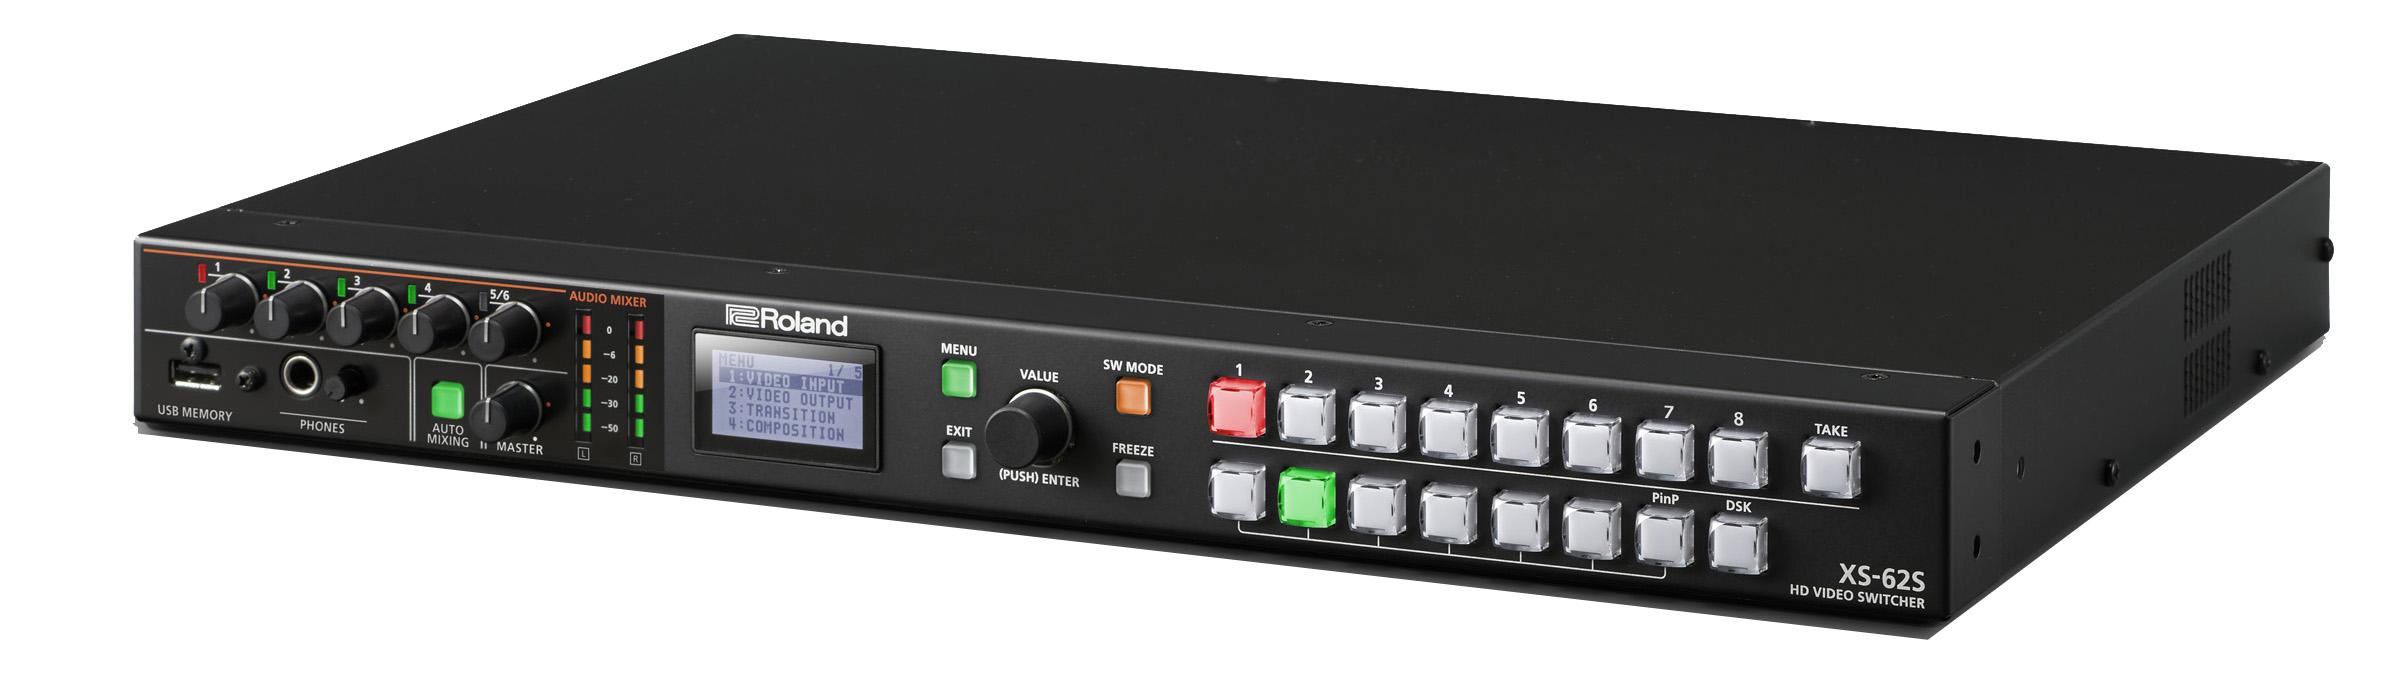 Roland Releases v1.2 Update for XS-62S HD Video Switcher – BROADFIELD NEWS